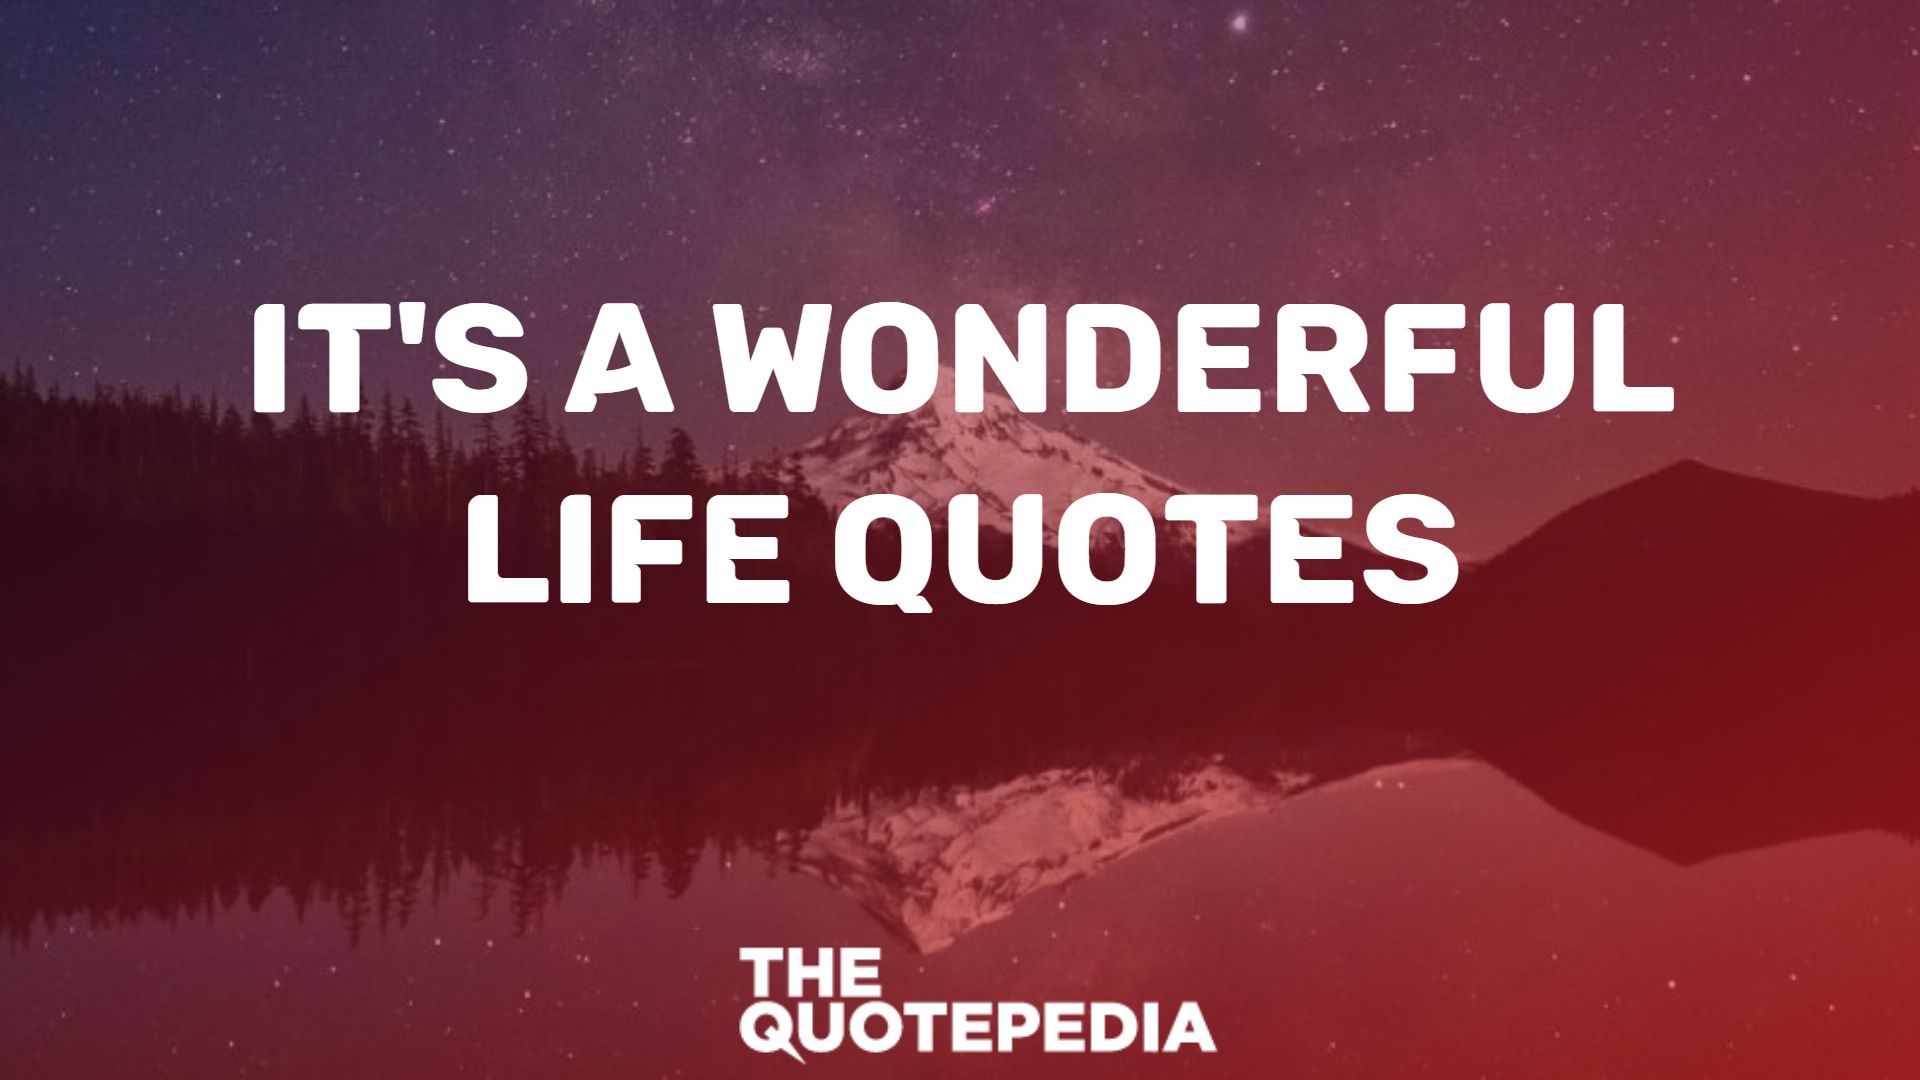 It's A Wonderful Life Quotes